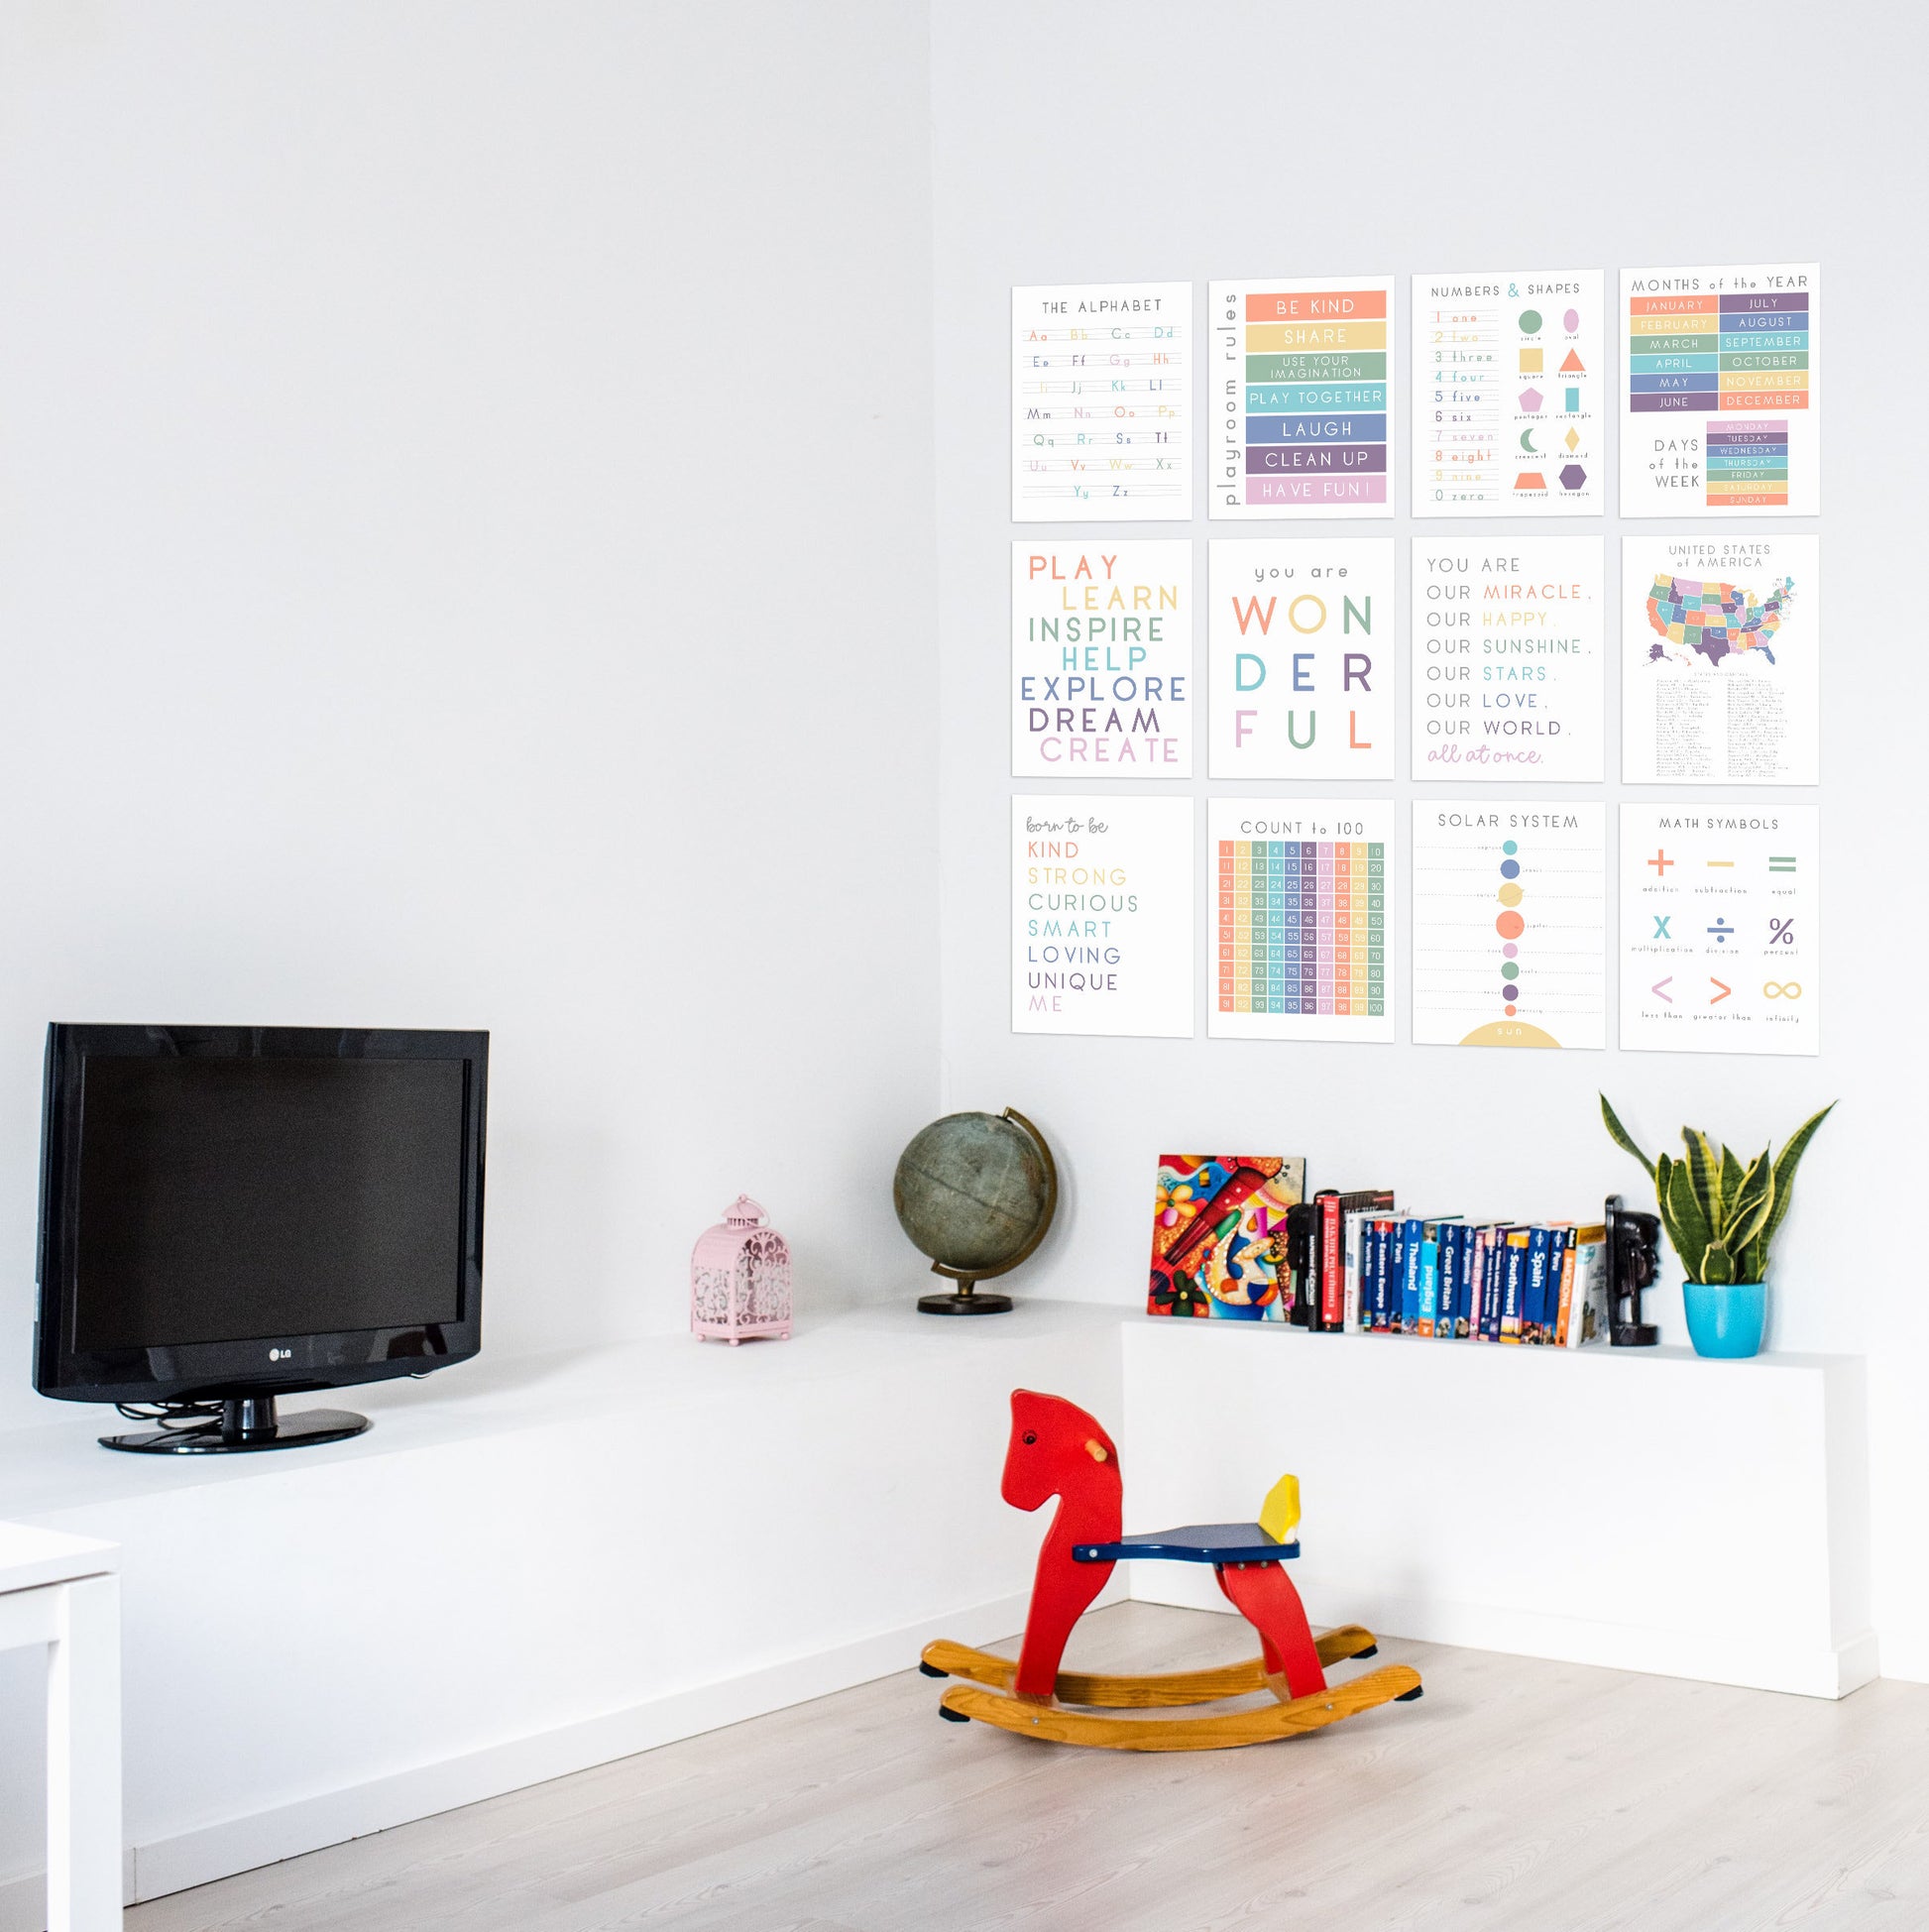 Homeschool Posters, Playroom Rules, Educational Prints, Preschool Signs, Classroom Signs, US Map, Alphabet, Solar System, Math, Numbers